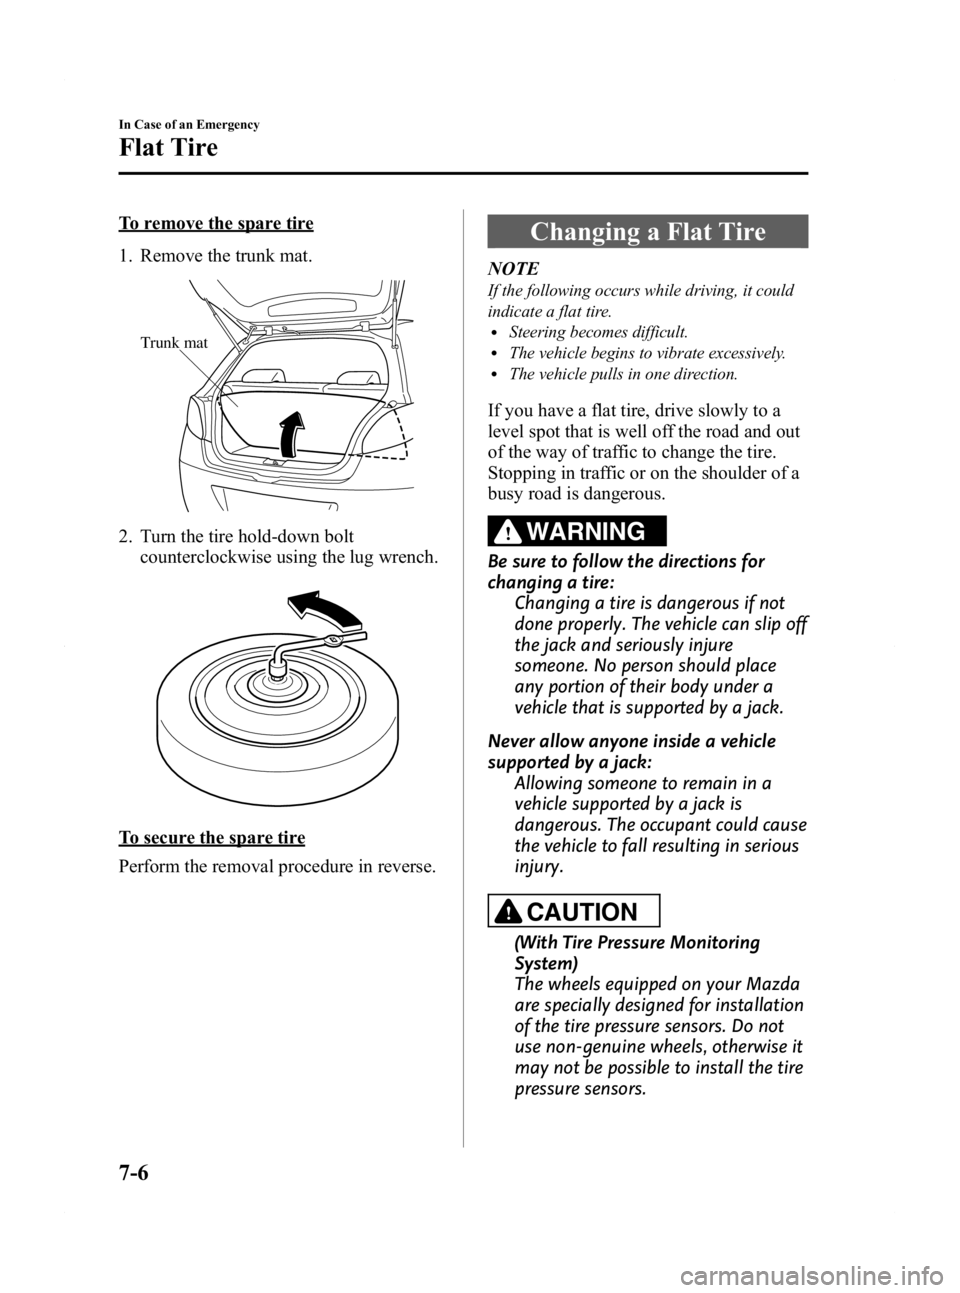 MAZDA MODEL 2 2011  Owners Manual Black plate (214,1)
To remove the spare tire
1. Remove the trunk mat.
Trunk mat
2. Turn the tire hold-down boltcounterclockwise using the lug wrench.
To secure the spare tire
Perform the removal proce